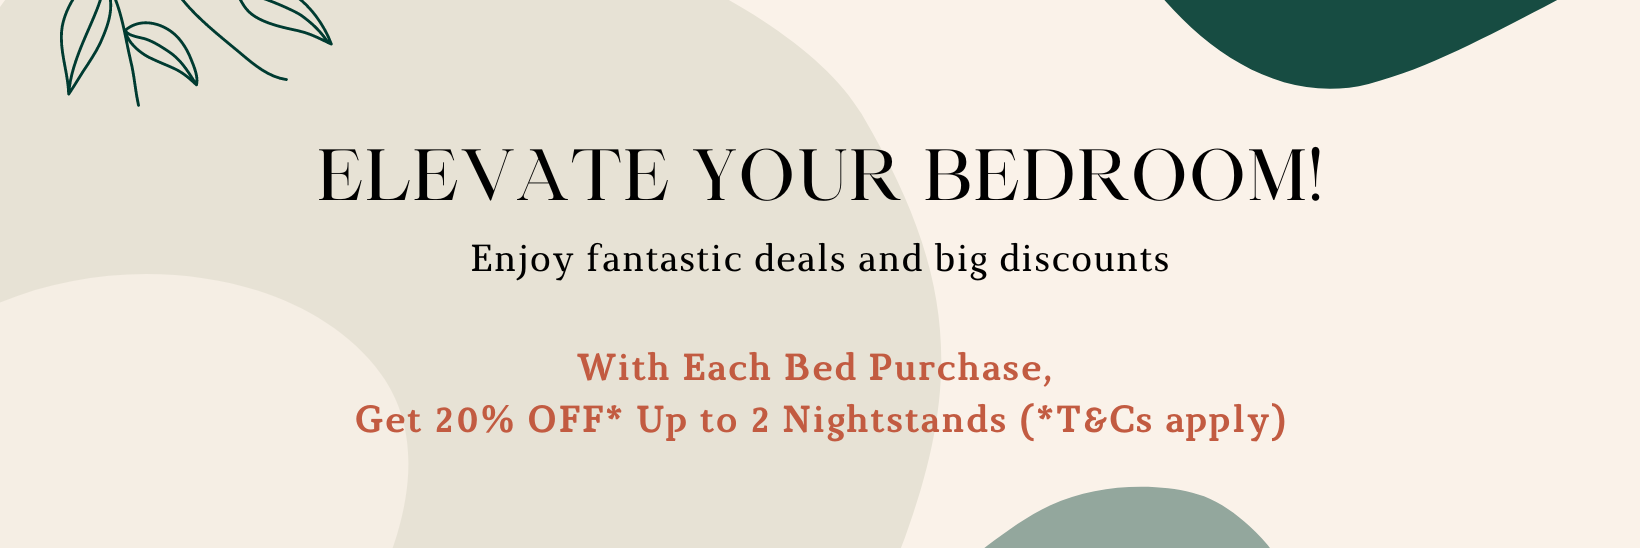 Elevate your bedroom! Enjoy fantastic deals and big discounts. With Each Bed Purchase,  Get 20% OFF* Up to 2 Nightstands (*T&Cs apply)